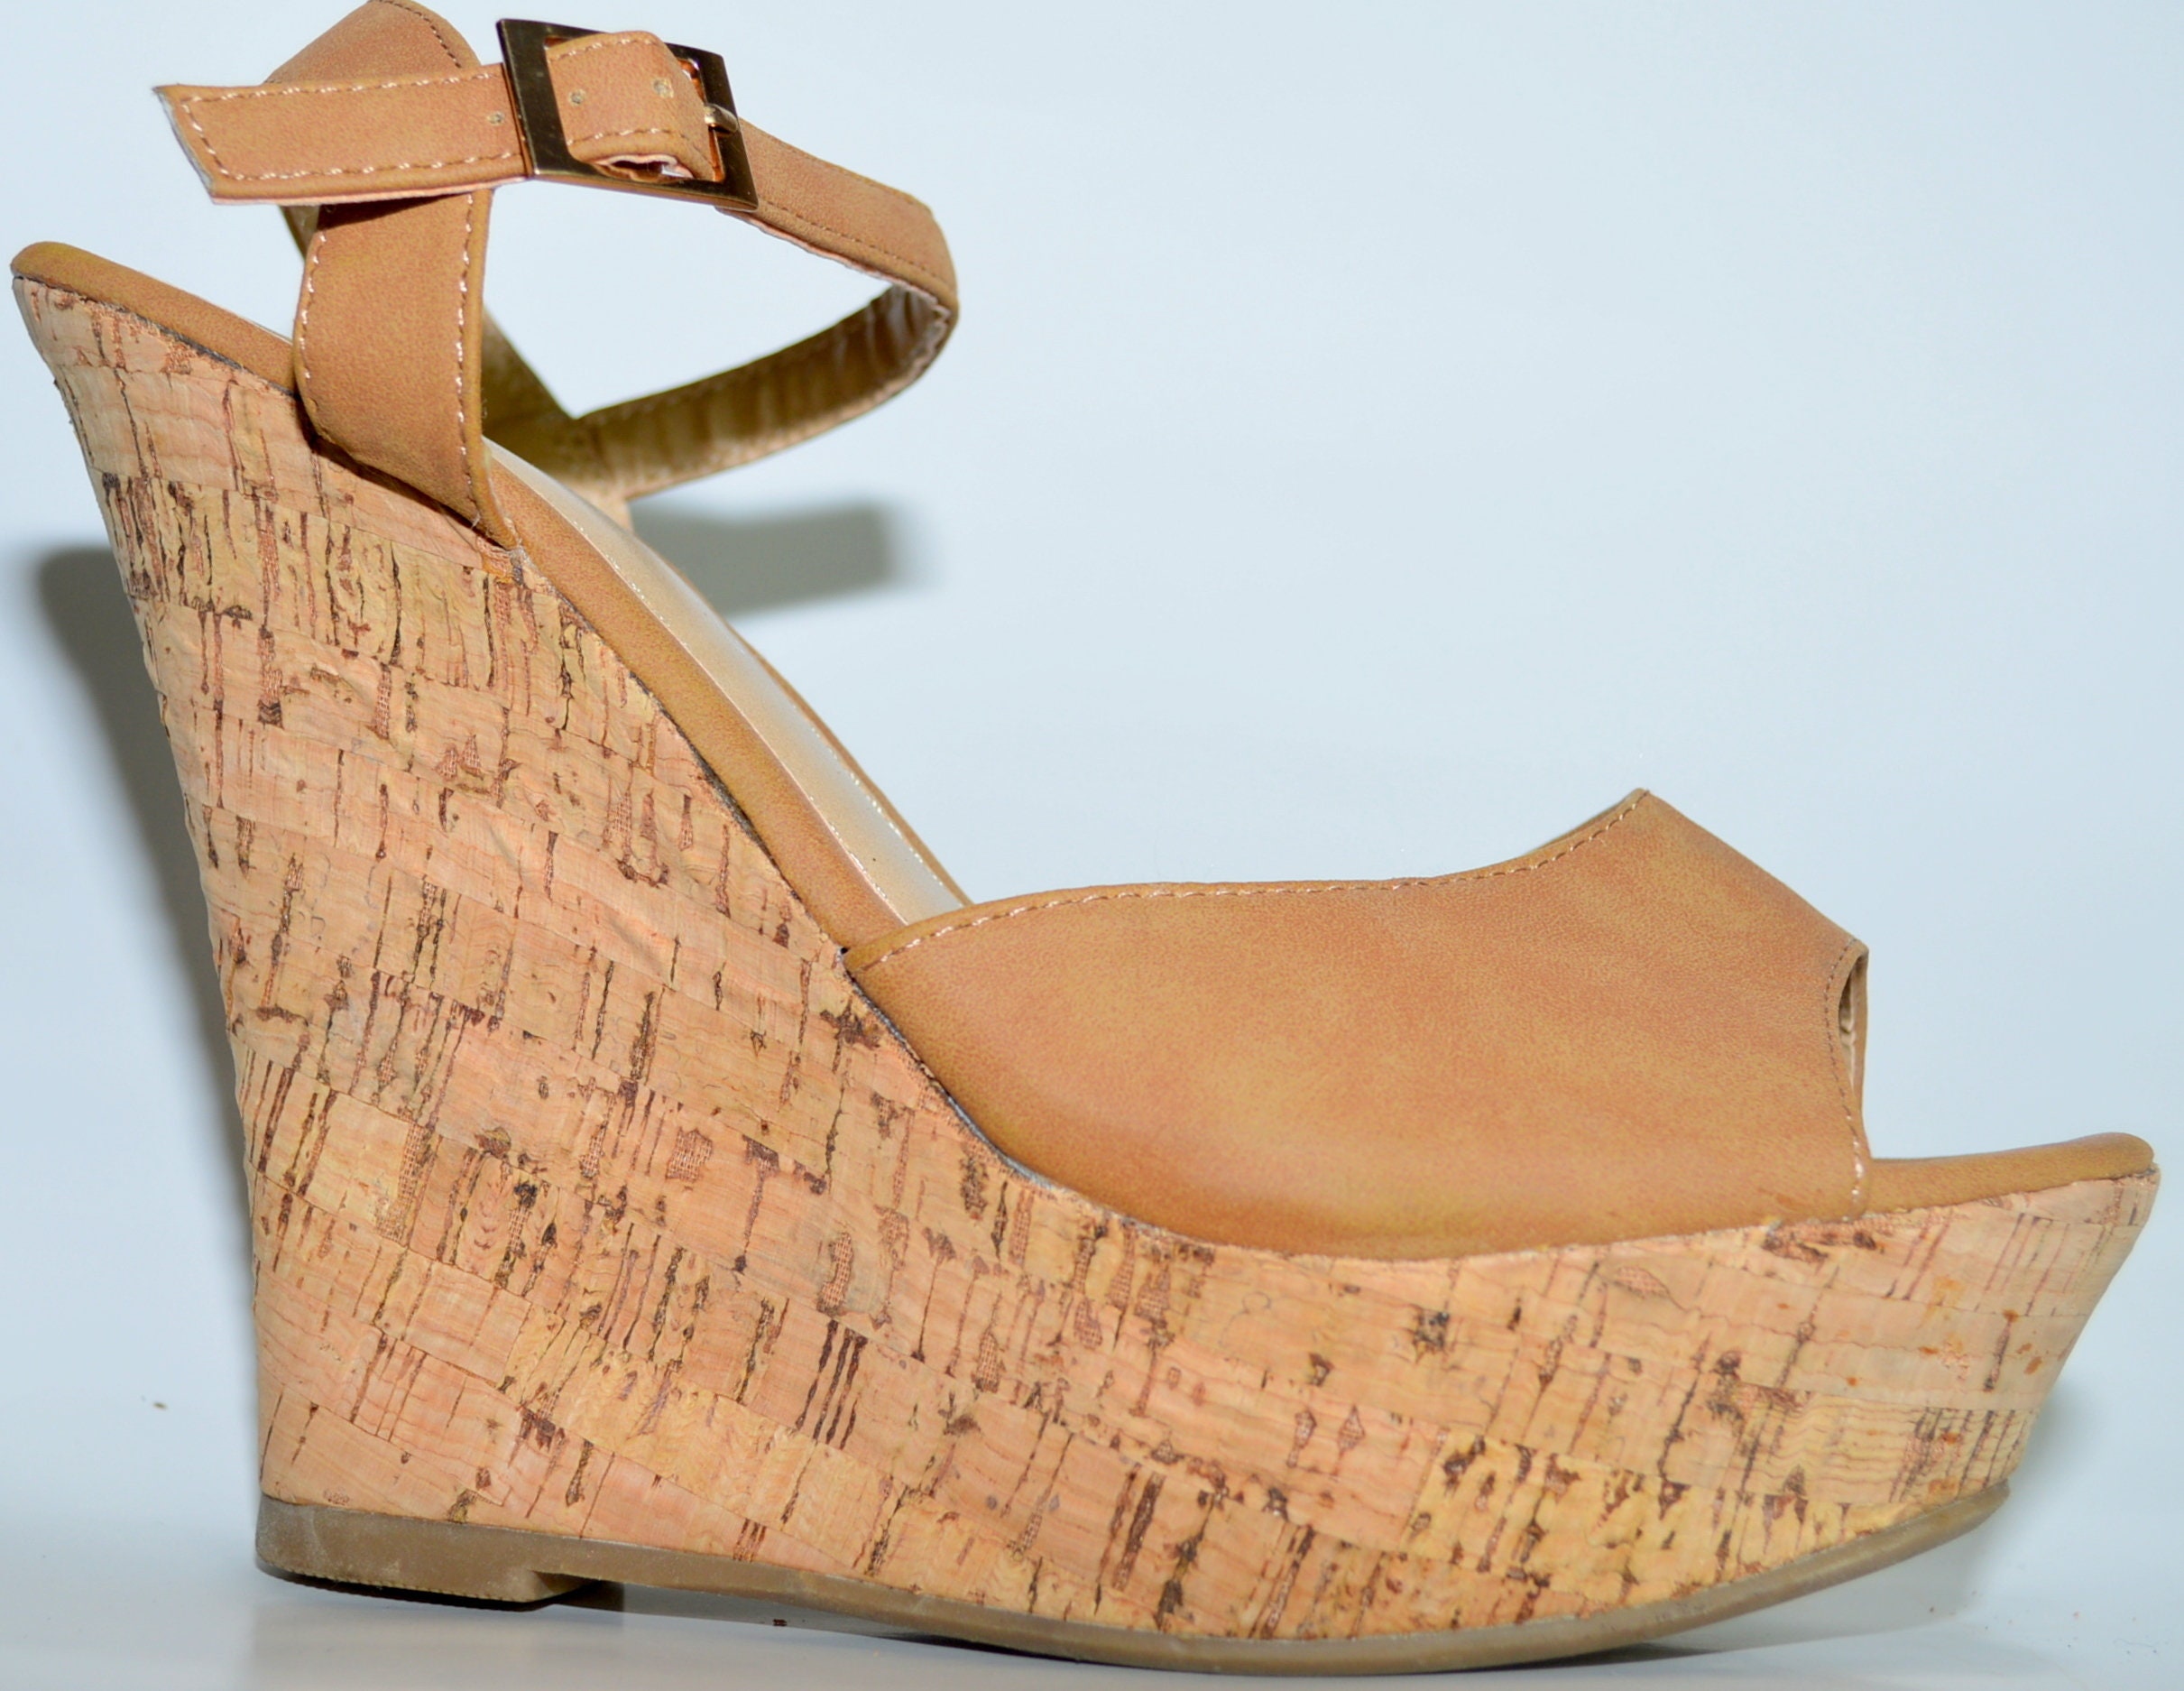 Buy Cork Sandals Online In India - Etsy India